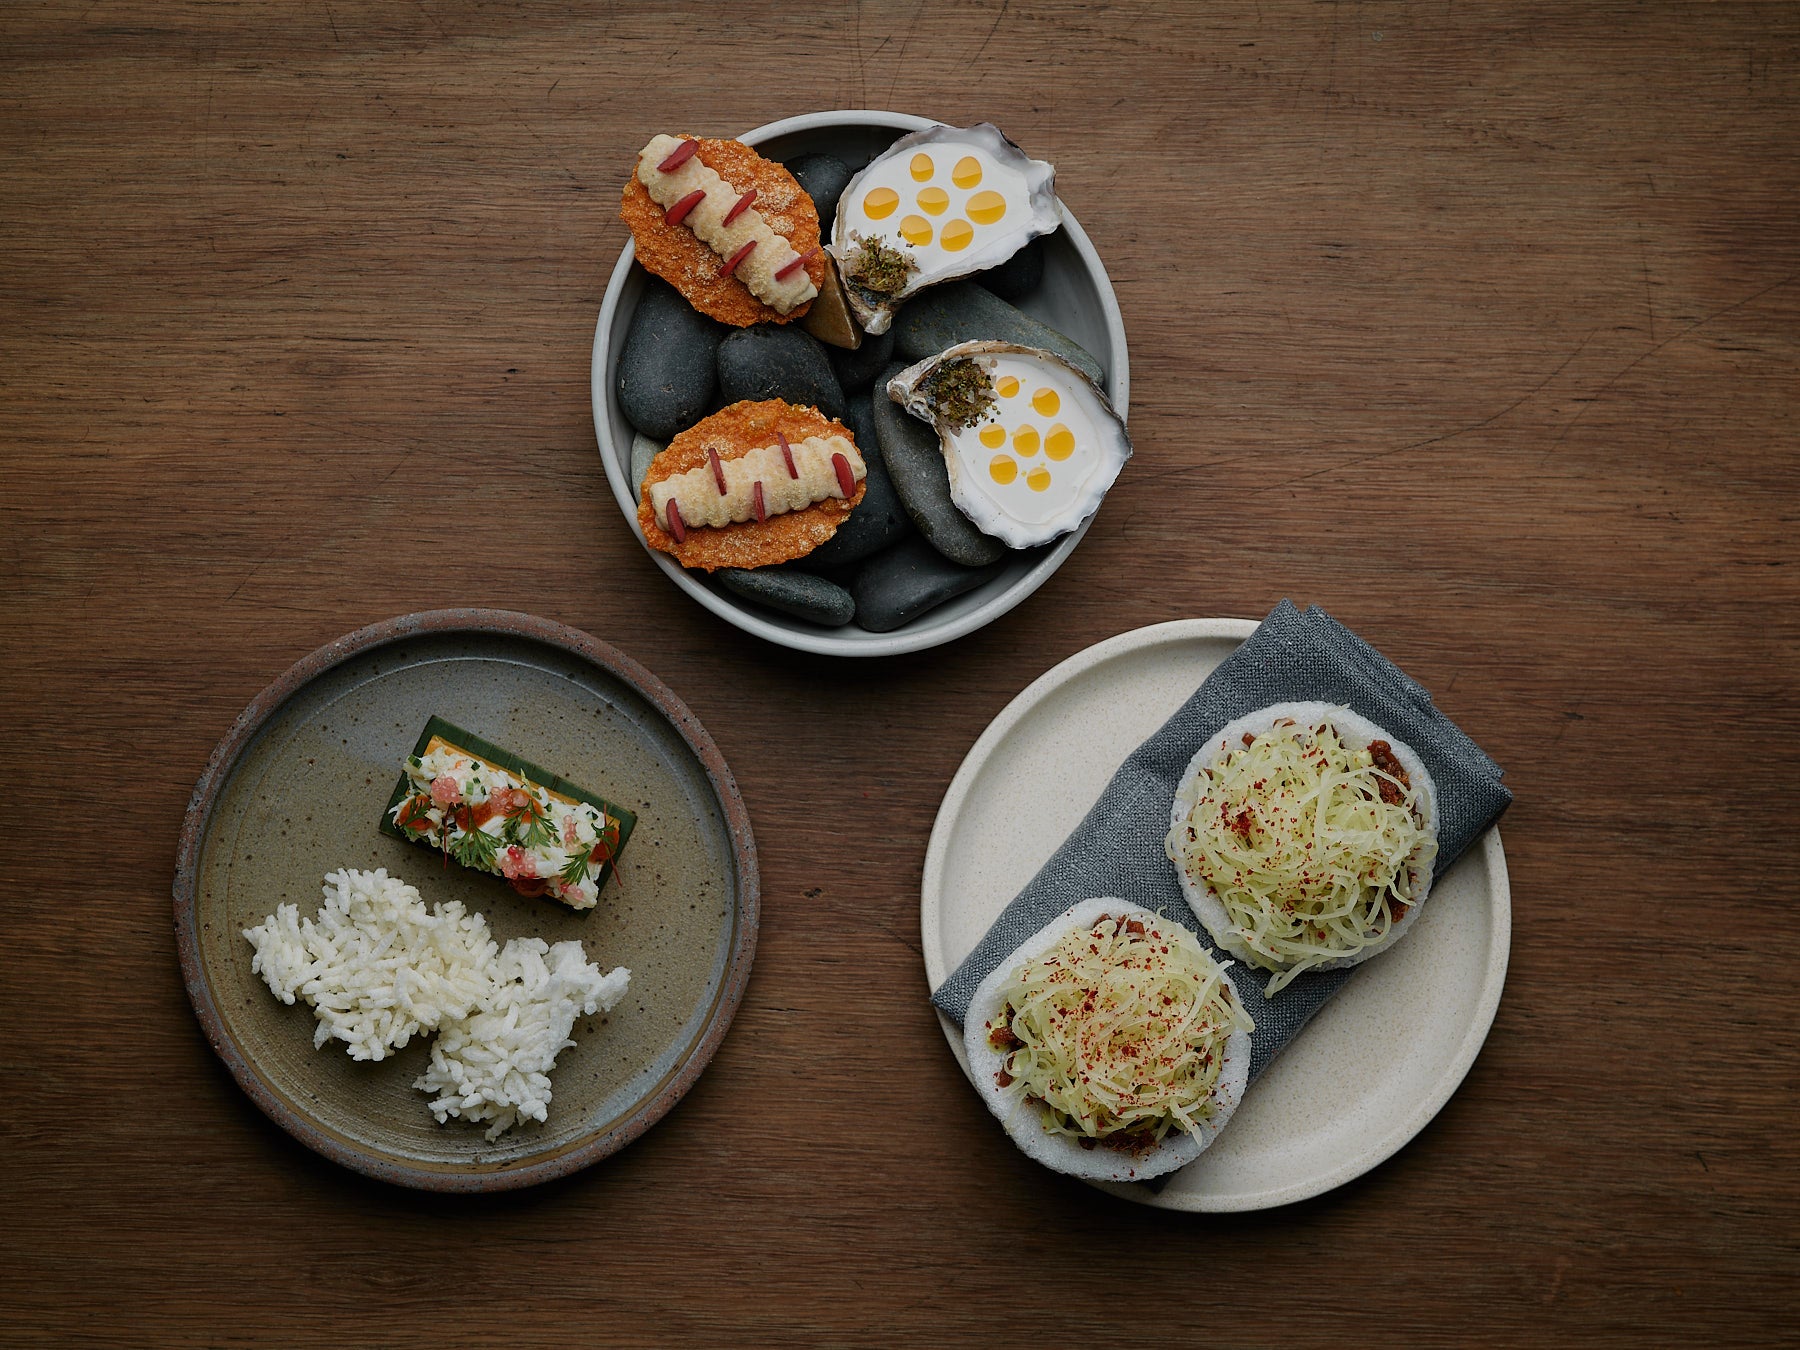 Expect modern Australian dining infused with Southeast Asian flavours at Sunda